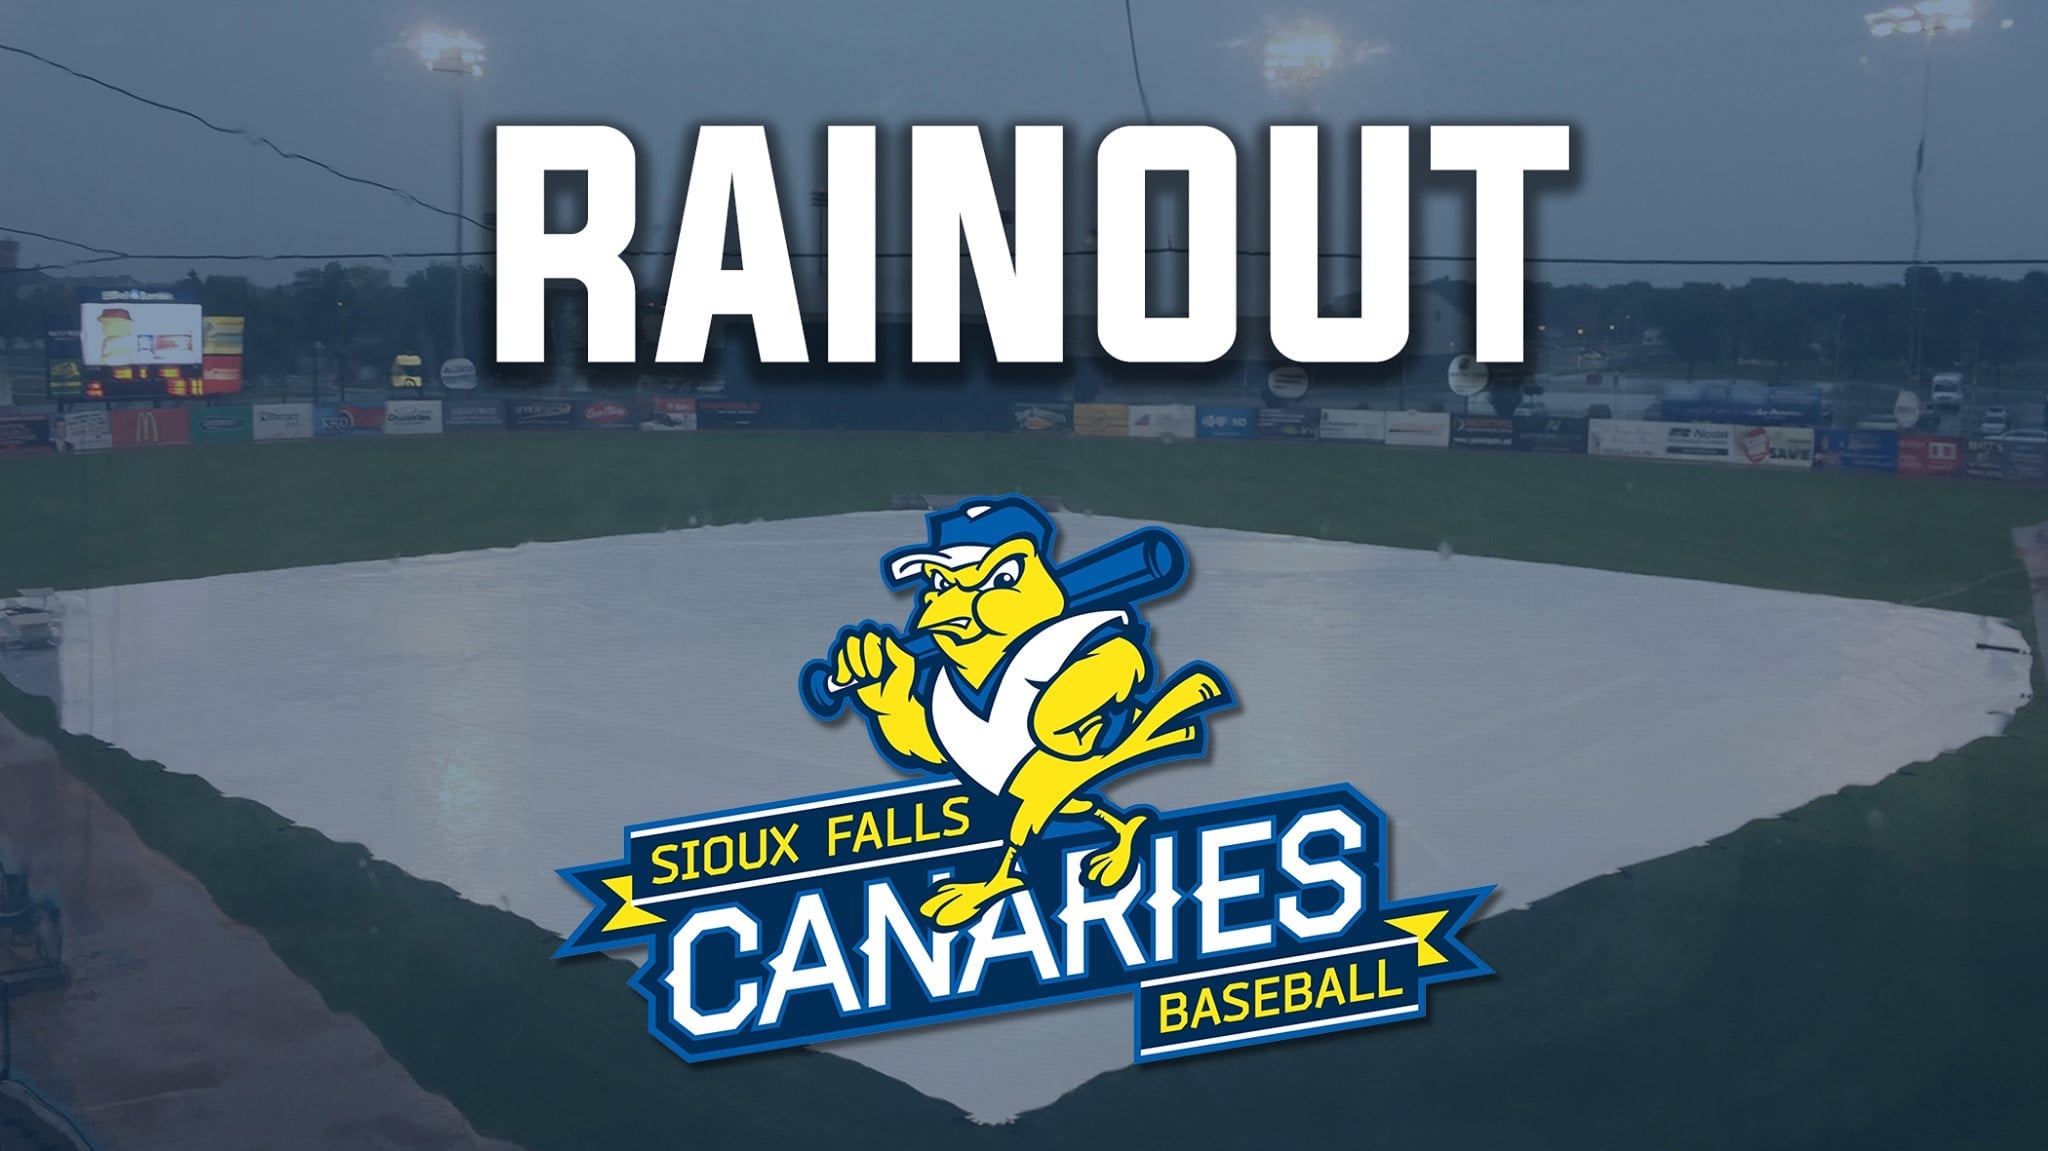 Canaries, Monarchs Postponed To Tuesday